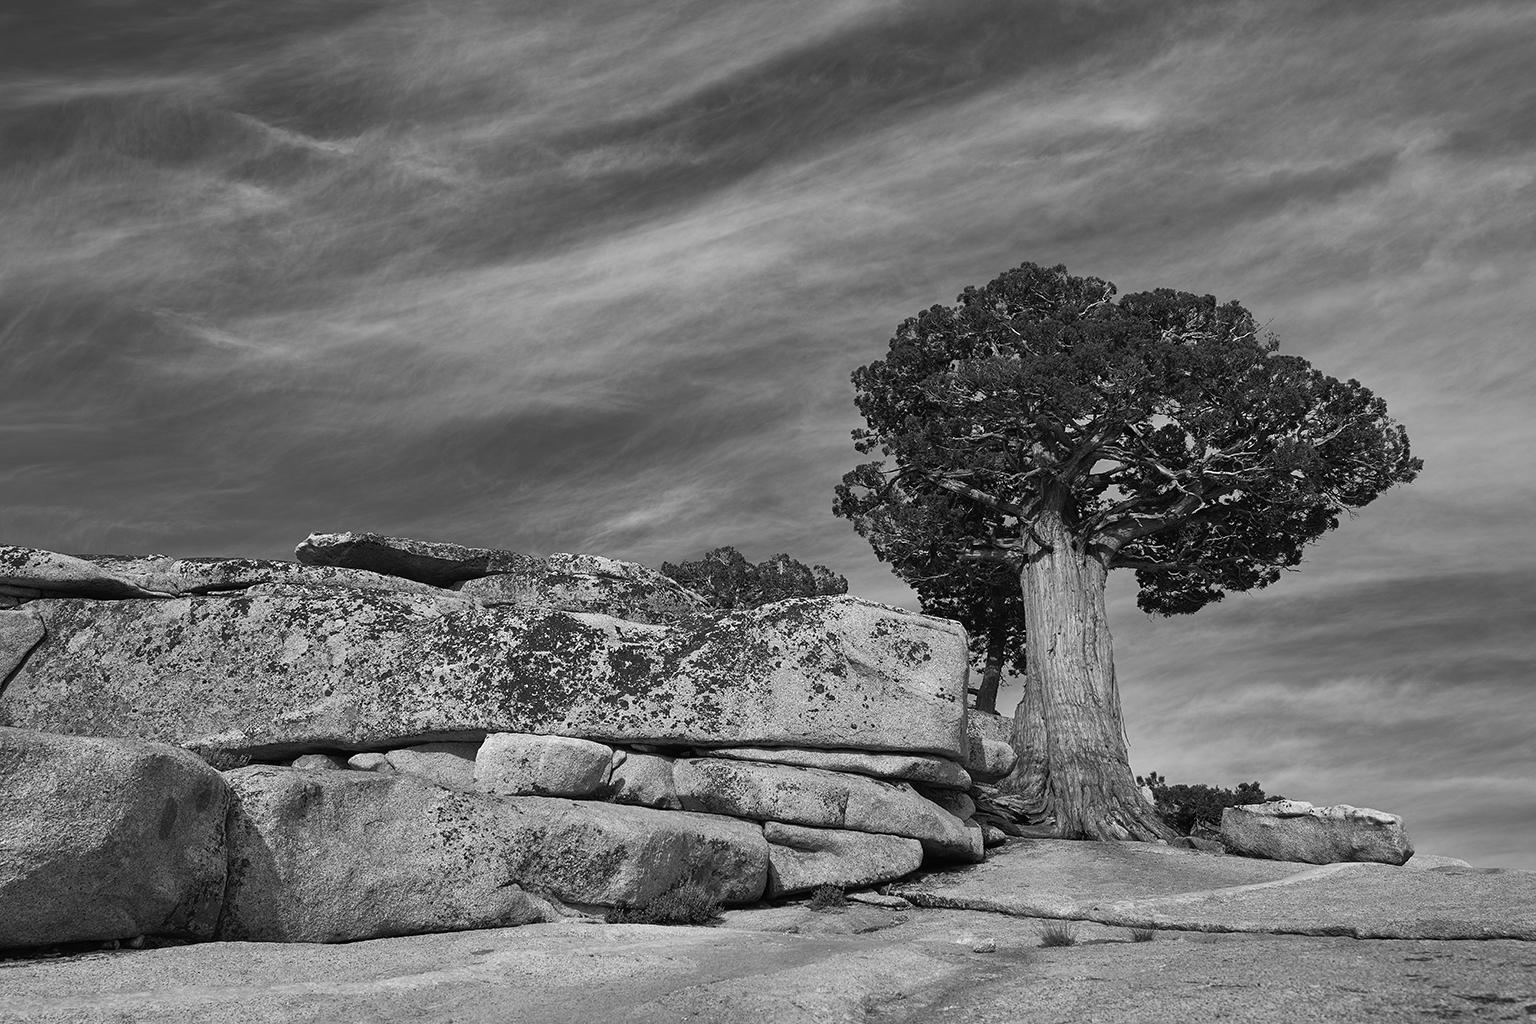 Tree Study IV - large scale photograph of dramatic mountain landscape - Contemporary Print by Frank Schott